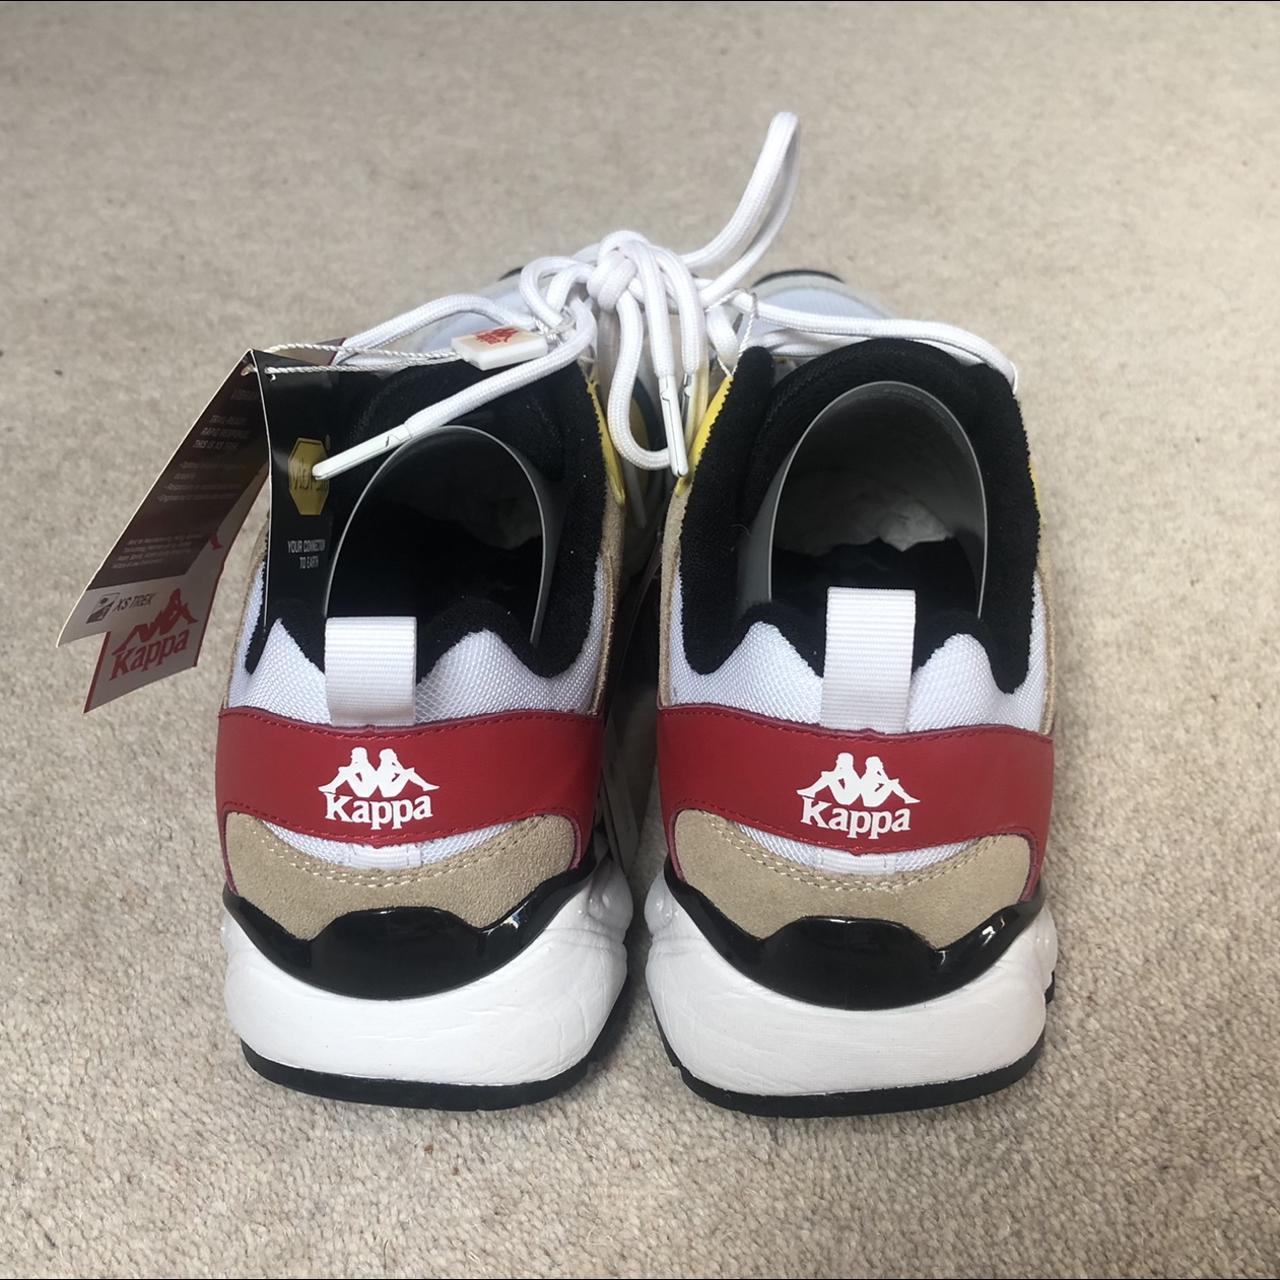 Kappa multi colour - Depop Brand trainers/shoes with... new